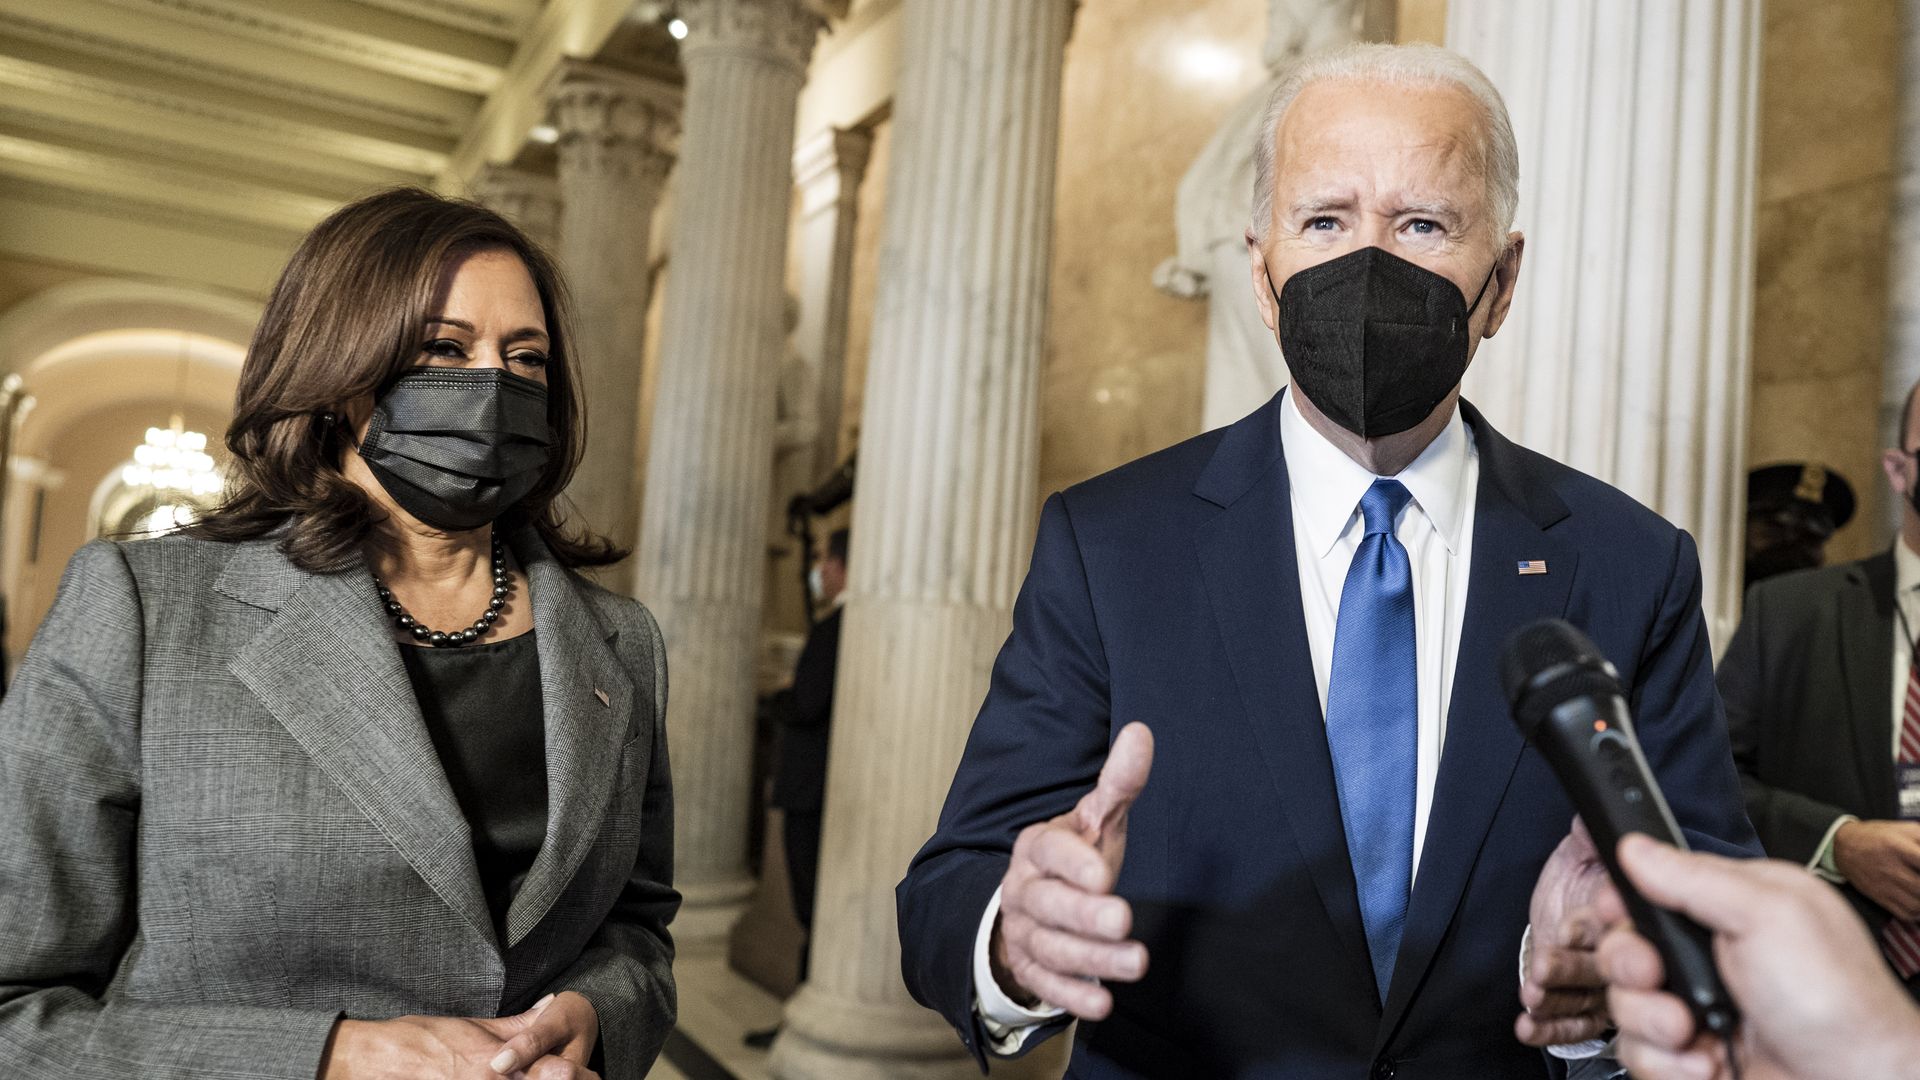 President Joe Biden speaks to the media as he departs with Vice President Kamala Harris after they spoke at the U.S. Capitol on January 6, 2022 in Washington, DC